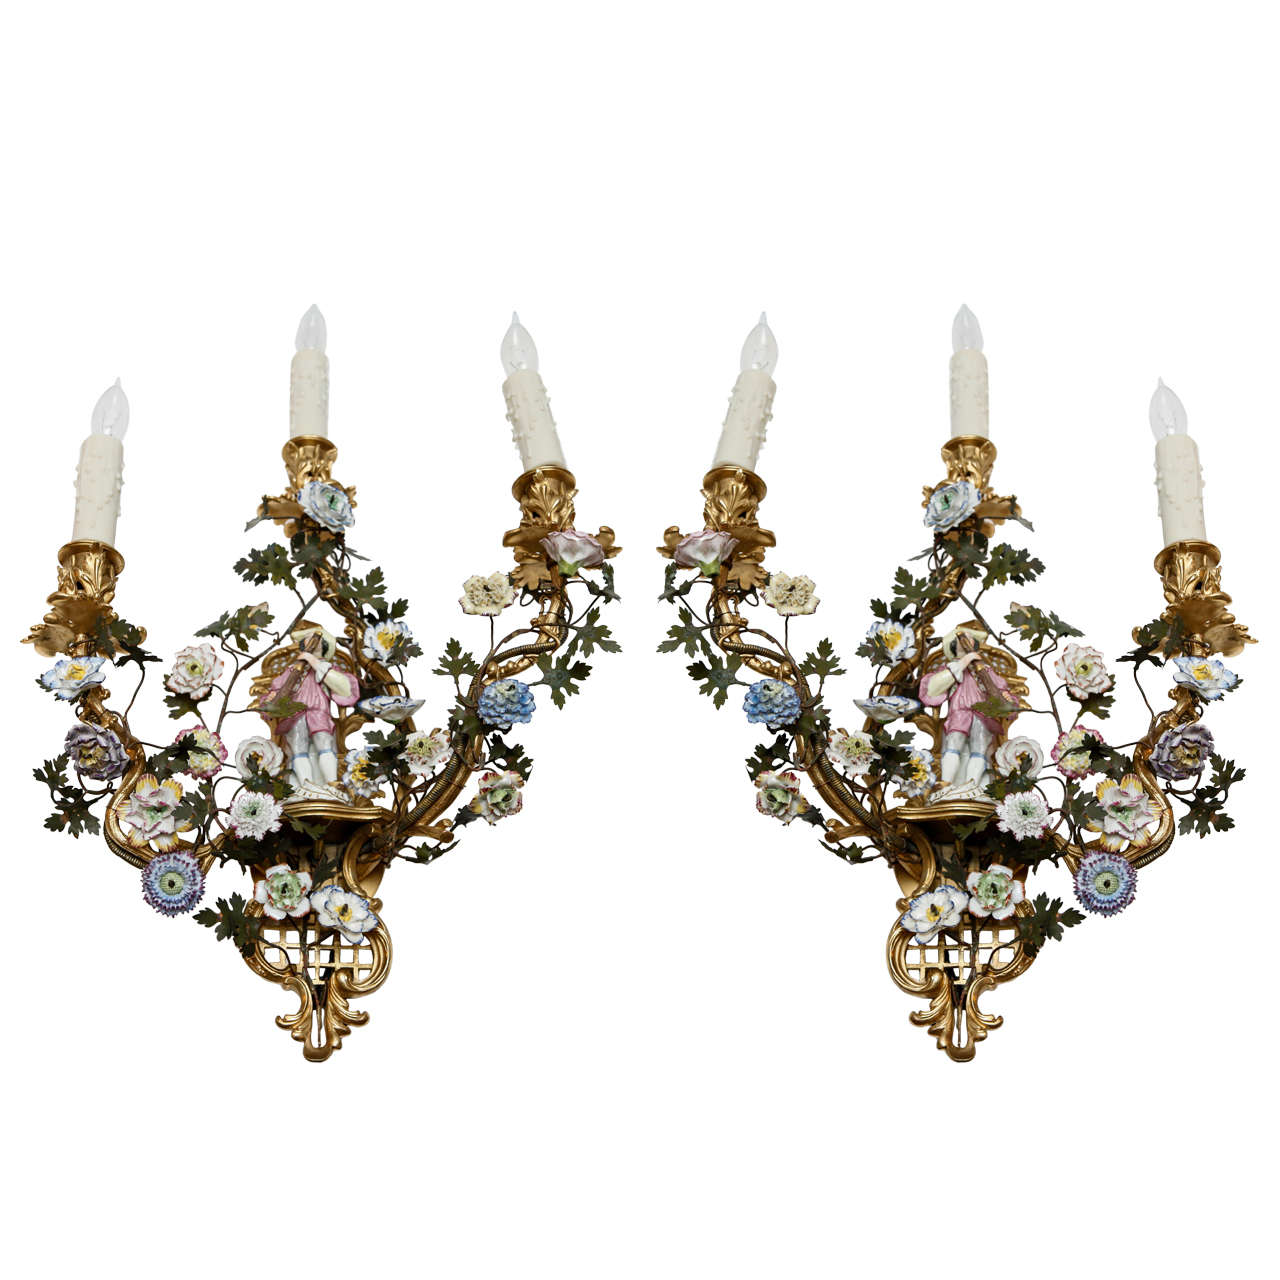 Pair of 19th c. French Porcelain Sconces